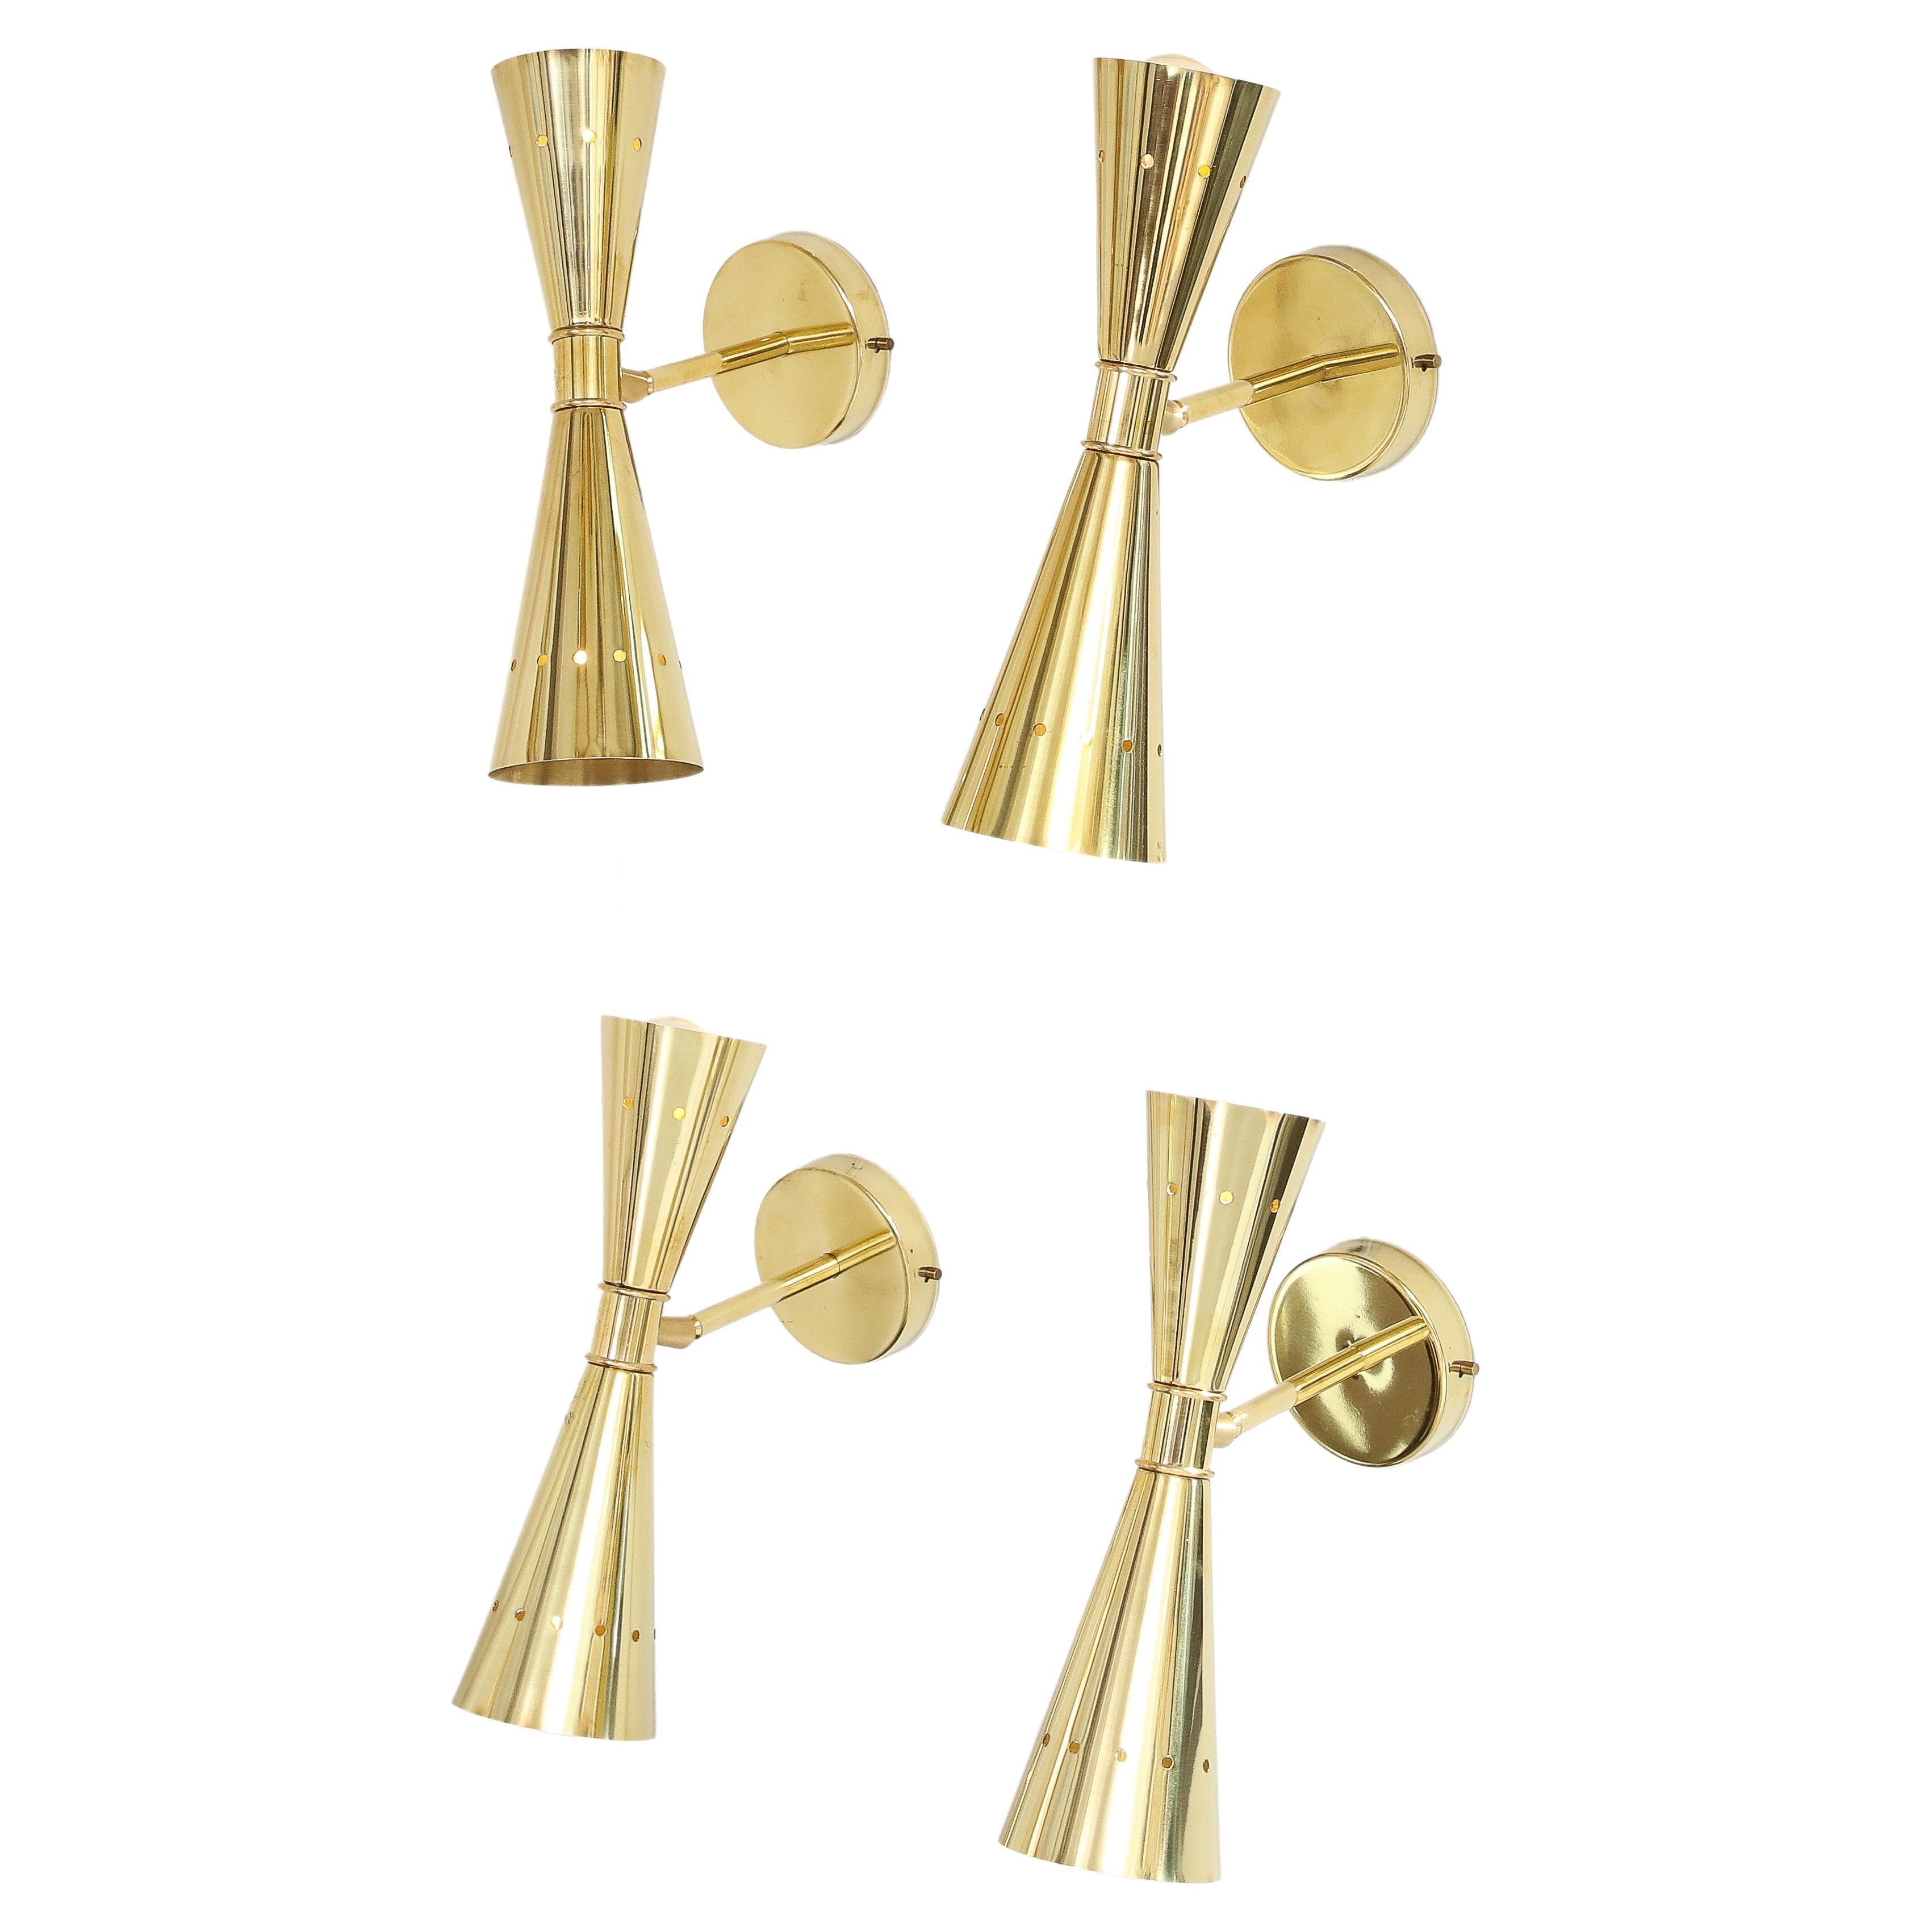 Set of Four Modernist Brass Double Cone Wall Lights or Sconces, Italy 2022 For Sale